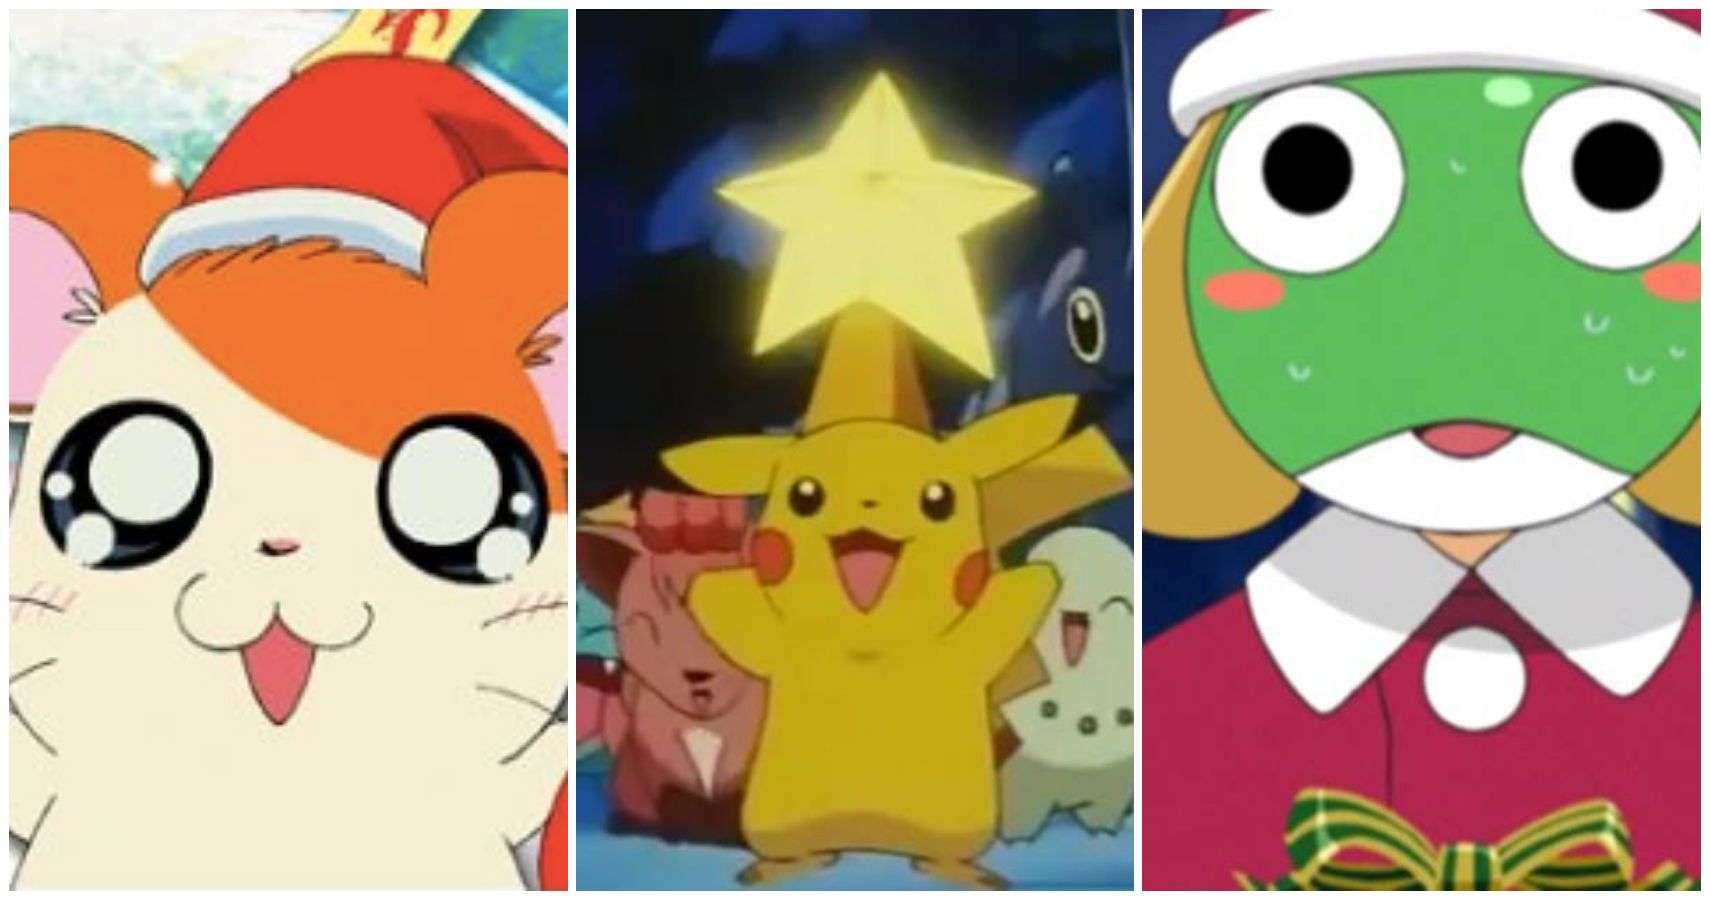 10 Heartwarming Anime Christmas Episodes To Watch Over The Holidays